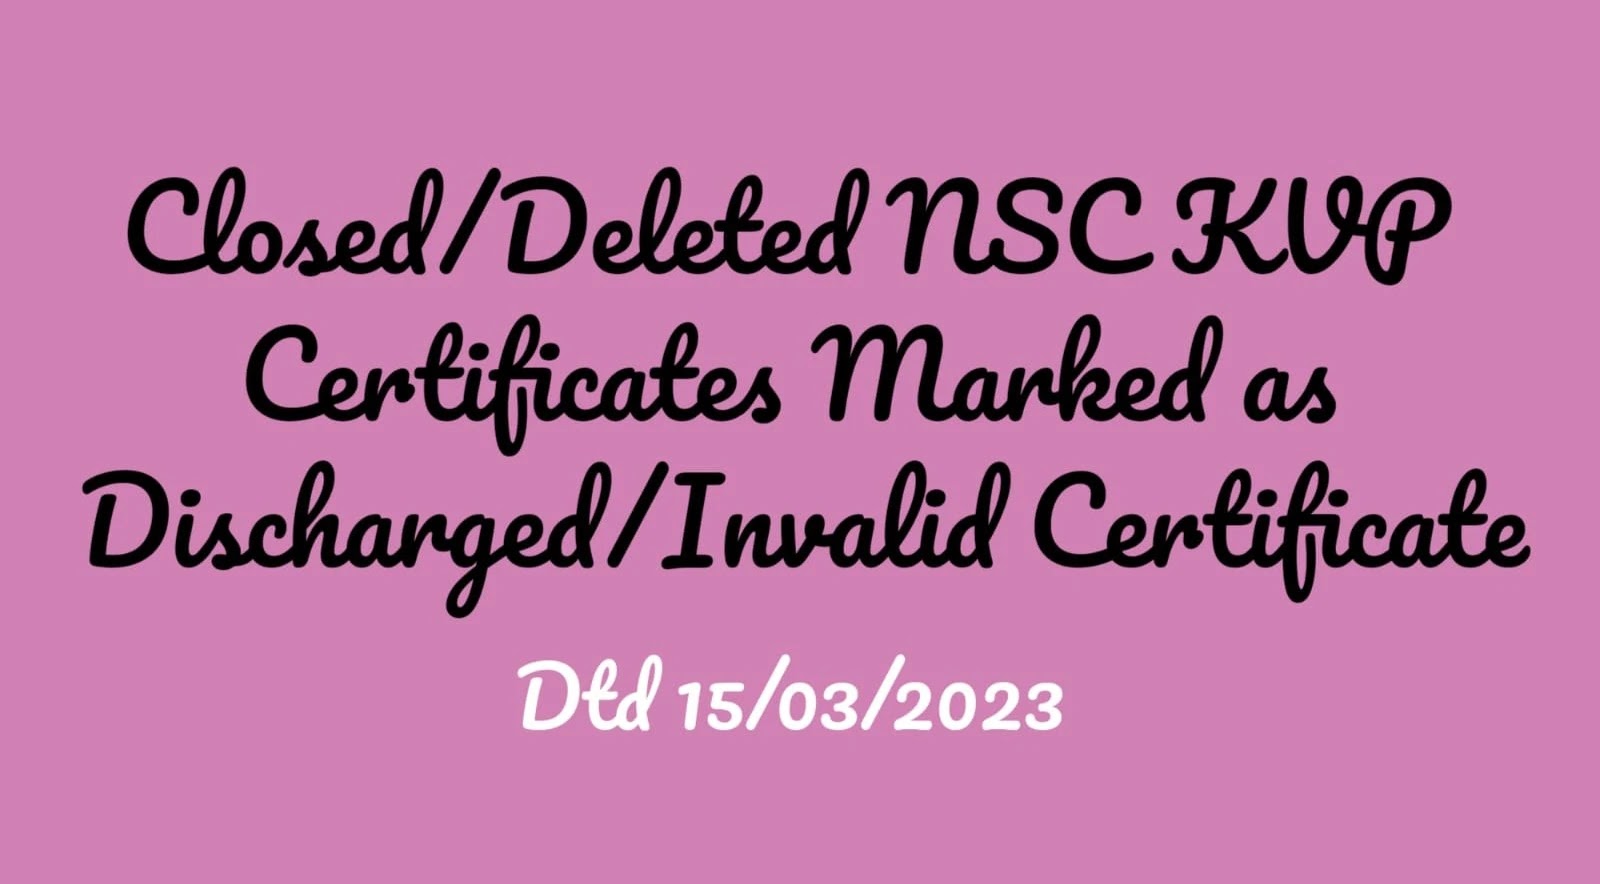 Deleted/Closed NSC/KVP Certificates Marked as Discharged/Invalid certificate in DOP CBS Finacle centrally through CEPT